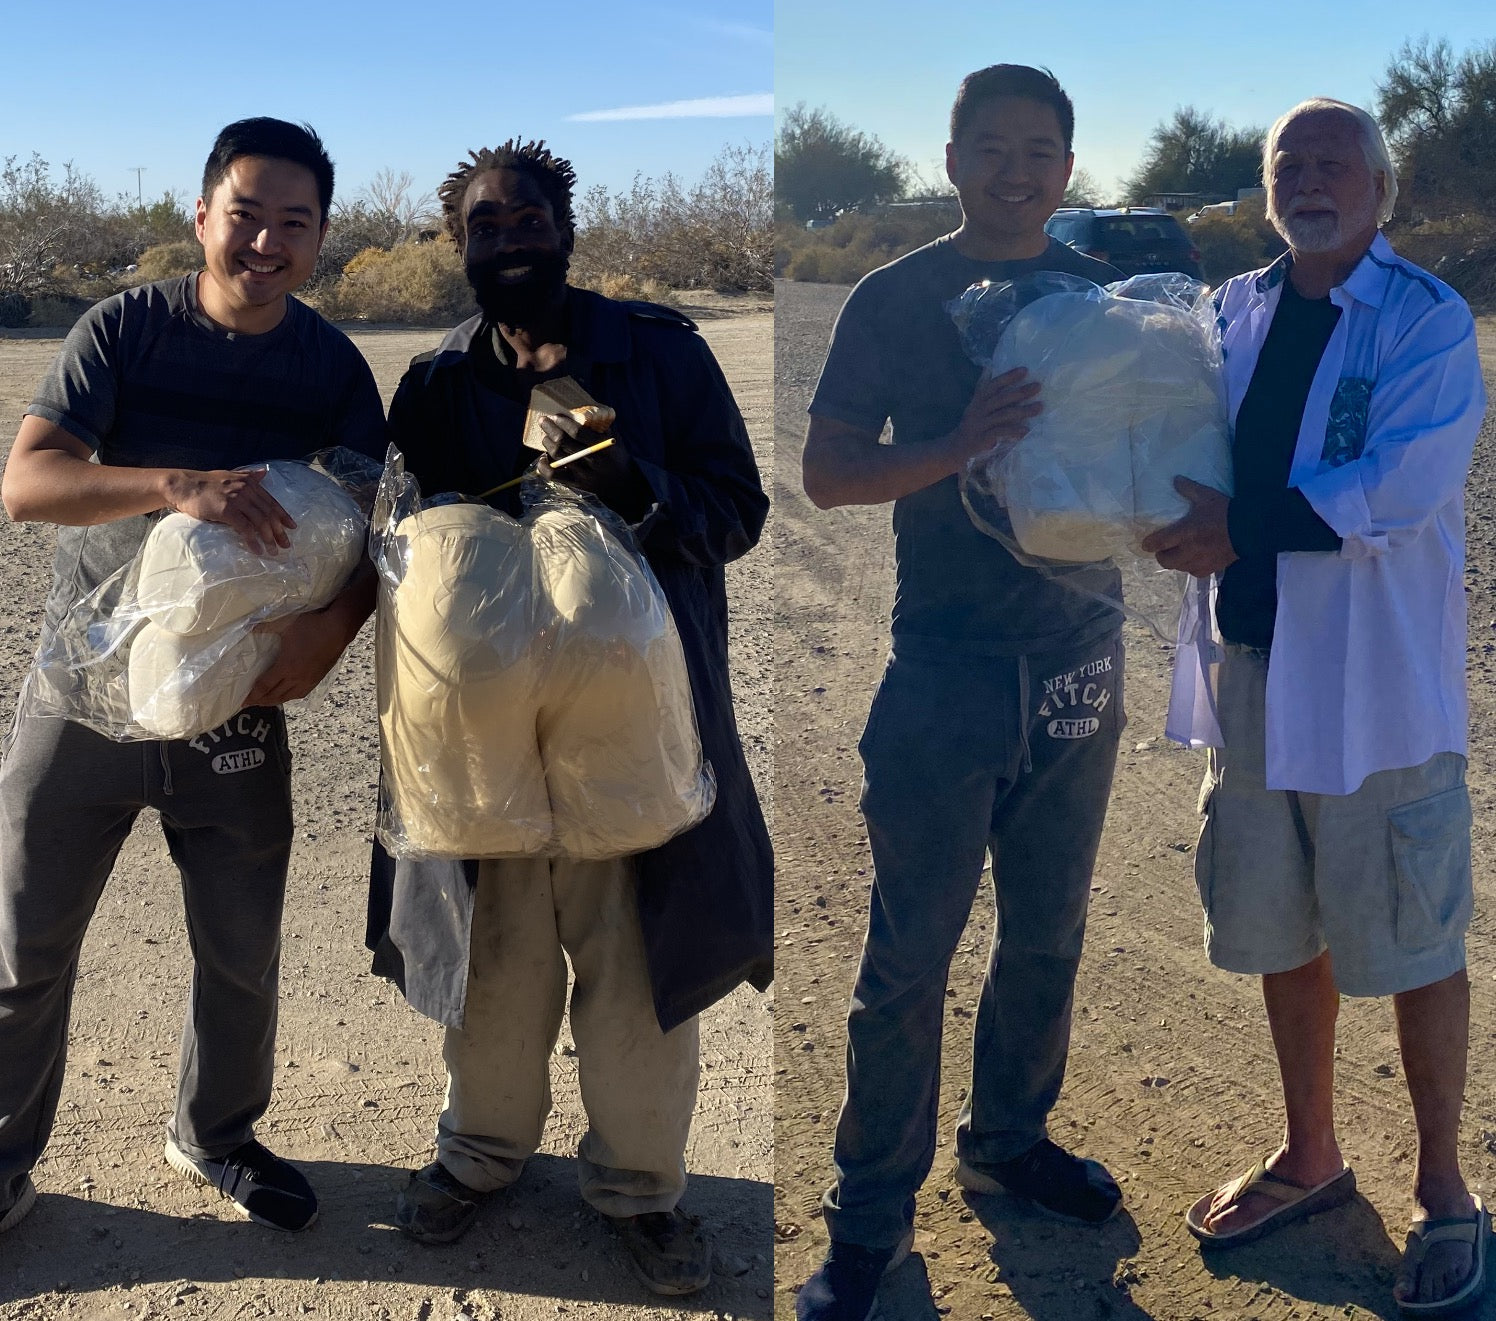 We went to Slab City and gave away our pillows...